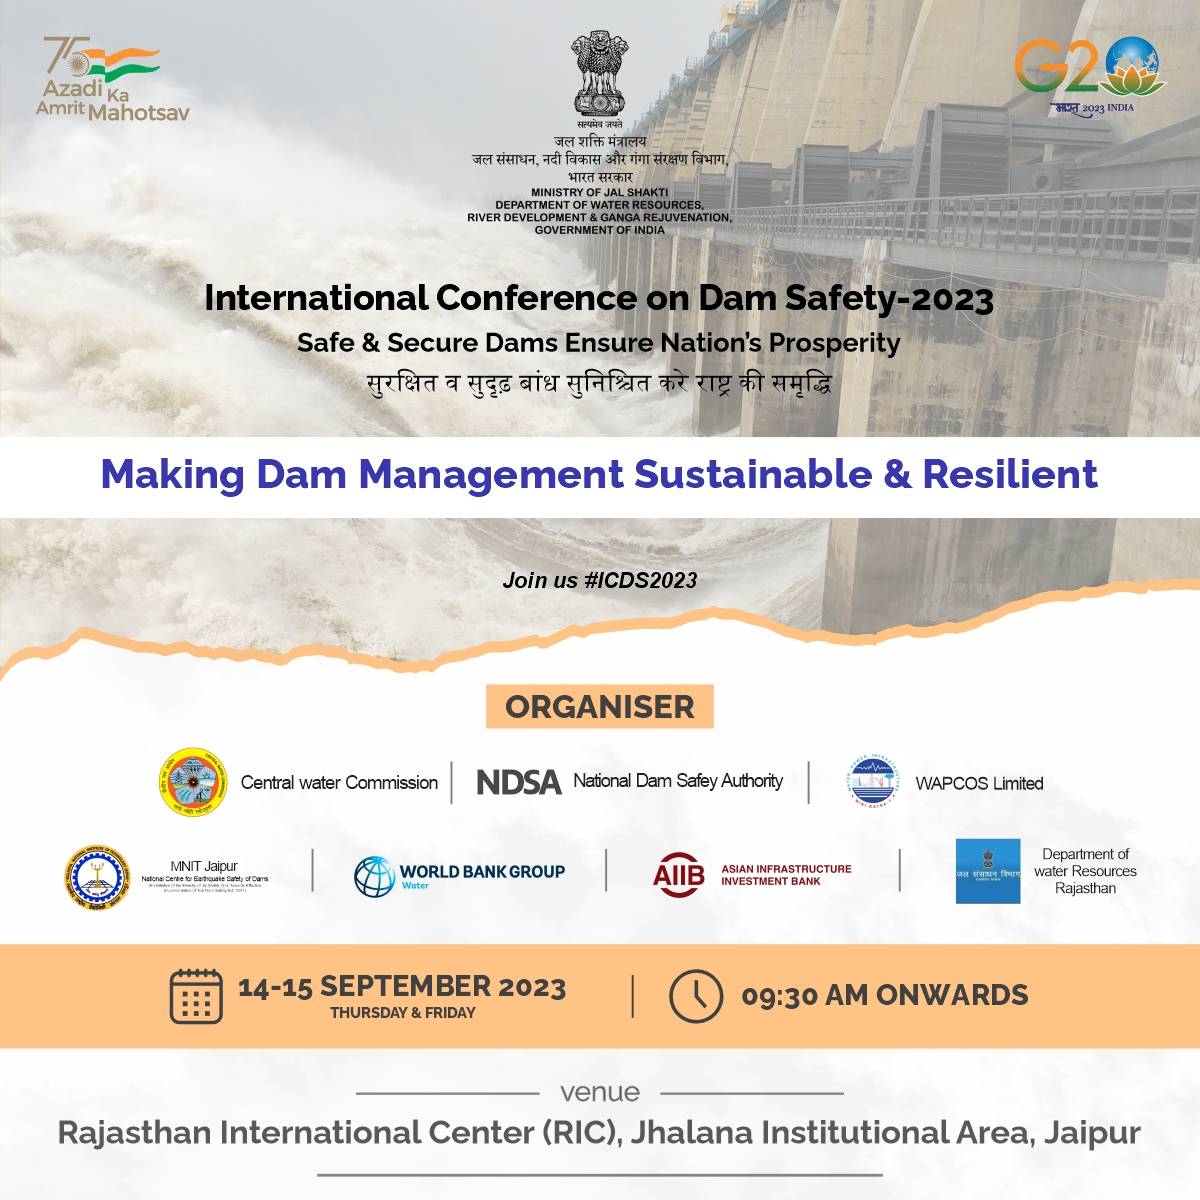 Vice President to Inaugurate International Conference on Dam Safety at Jaipur, Rajasthan on 14th September, 2023 (Photo Source: PIB)